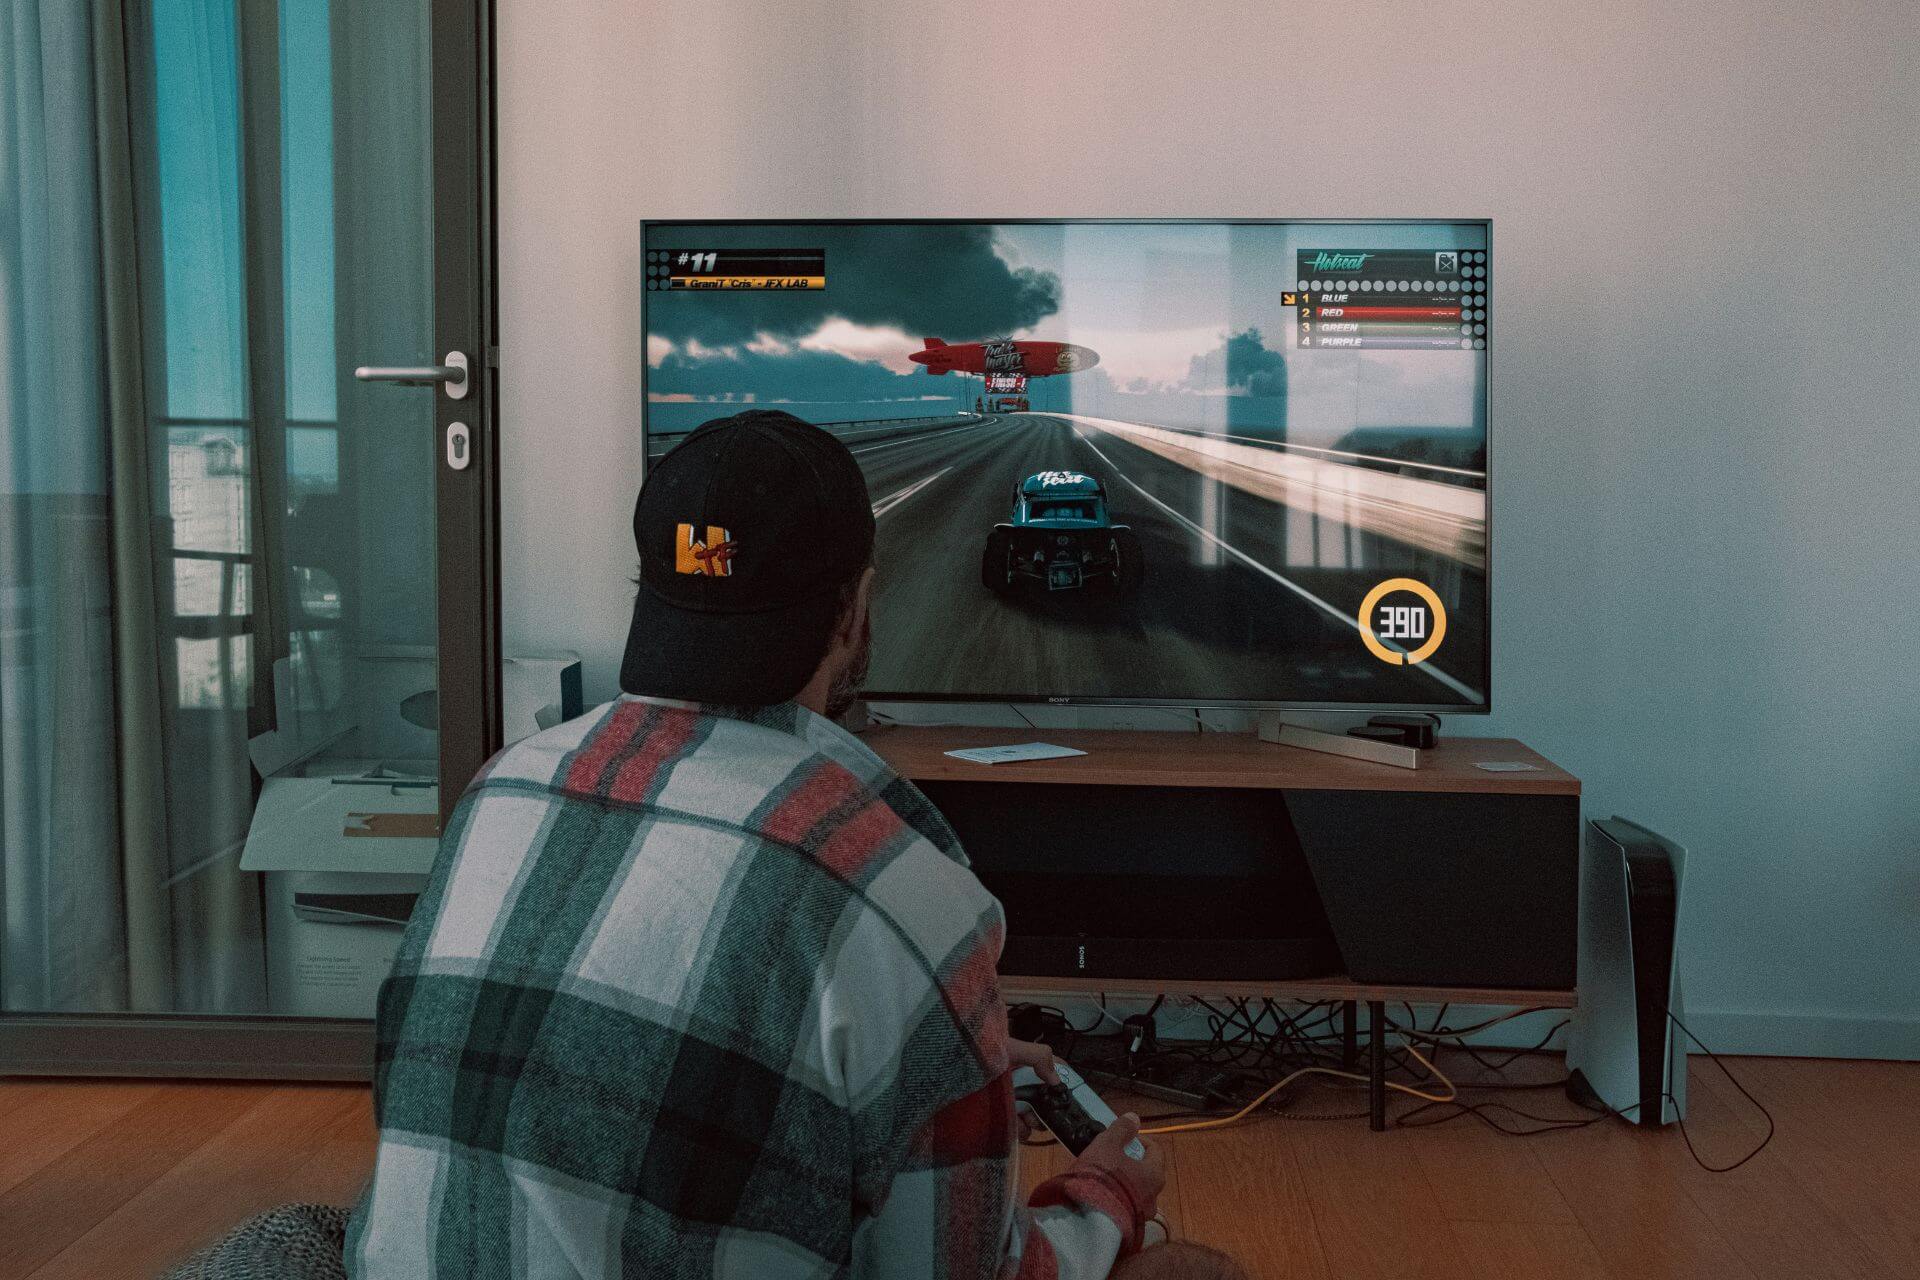 A person playing a racing video game on a large flat-screen TV in a living room. The screen shows a car driving on a racetrack with a speedometer indicating 390 km/h.